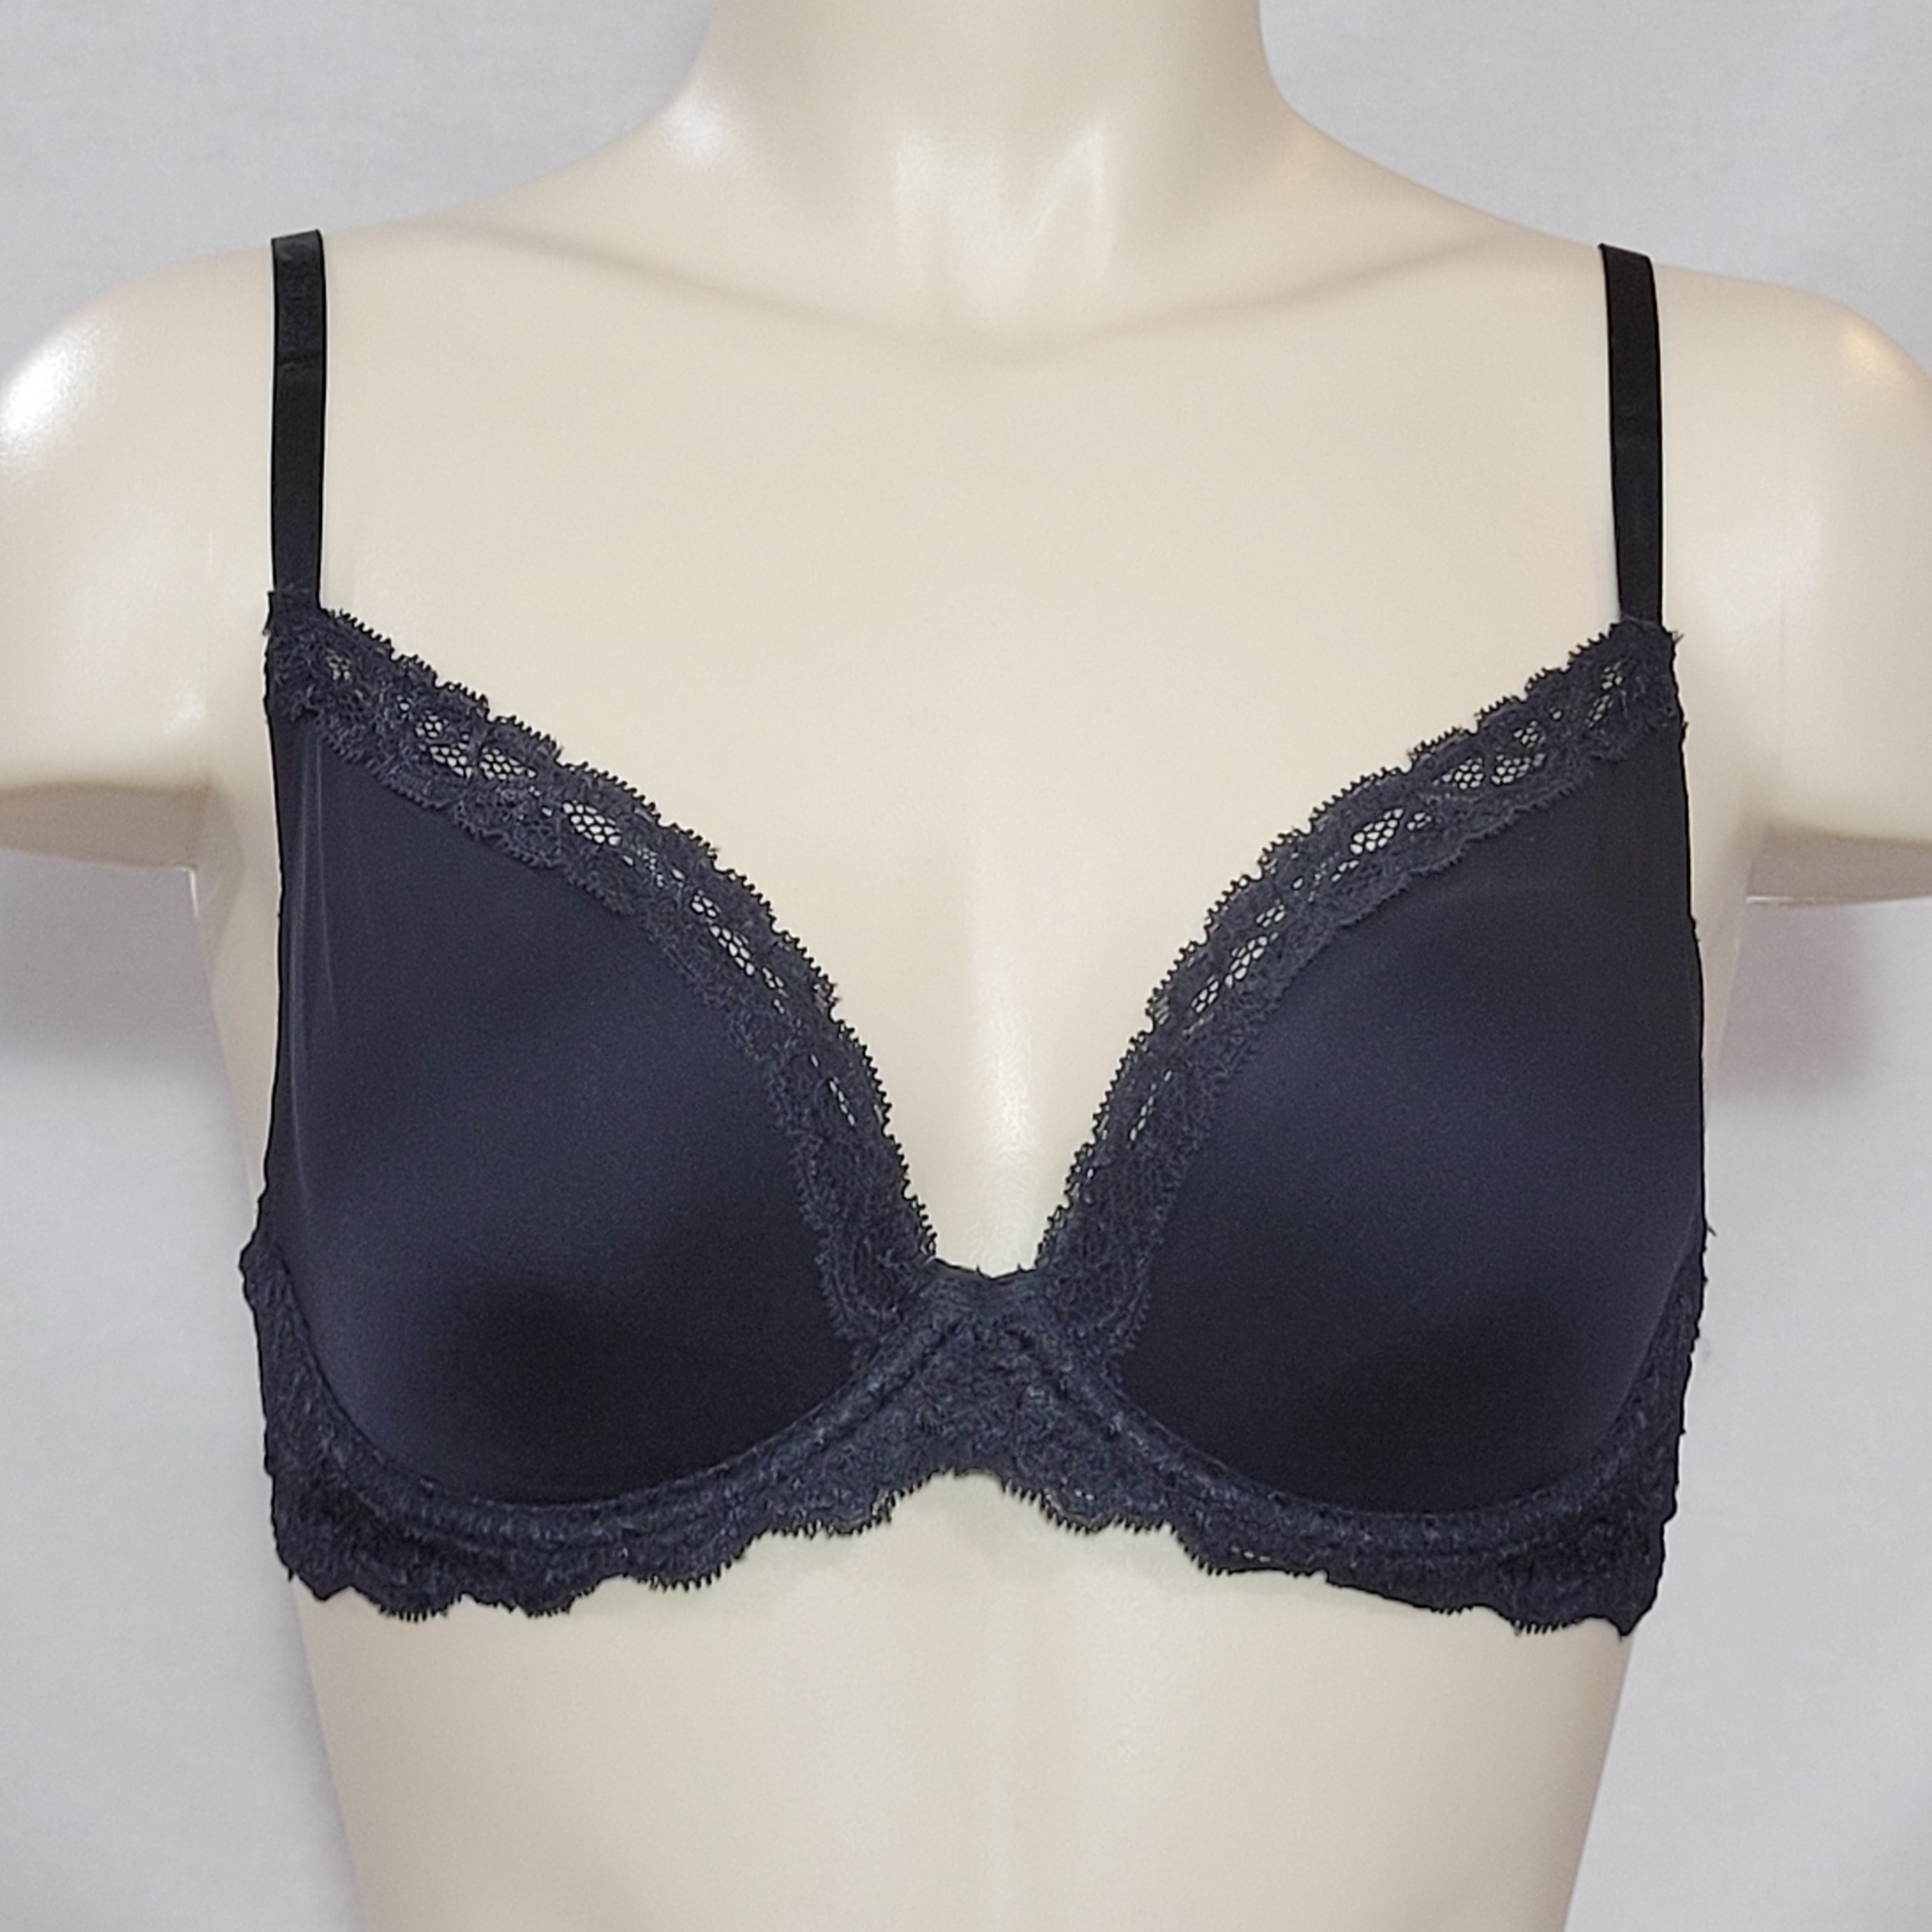 Paramour Nude Lace Racer back Front Closure Bra Size 36G - $20